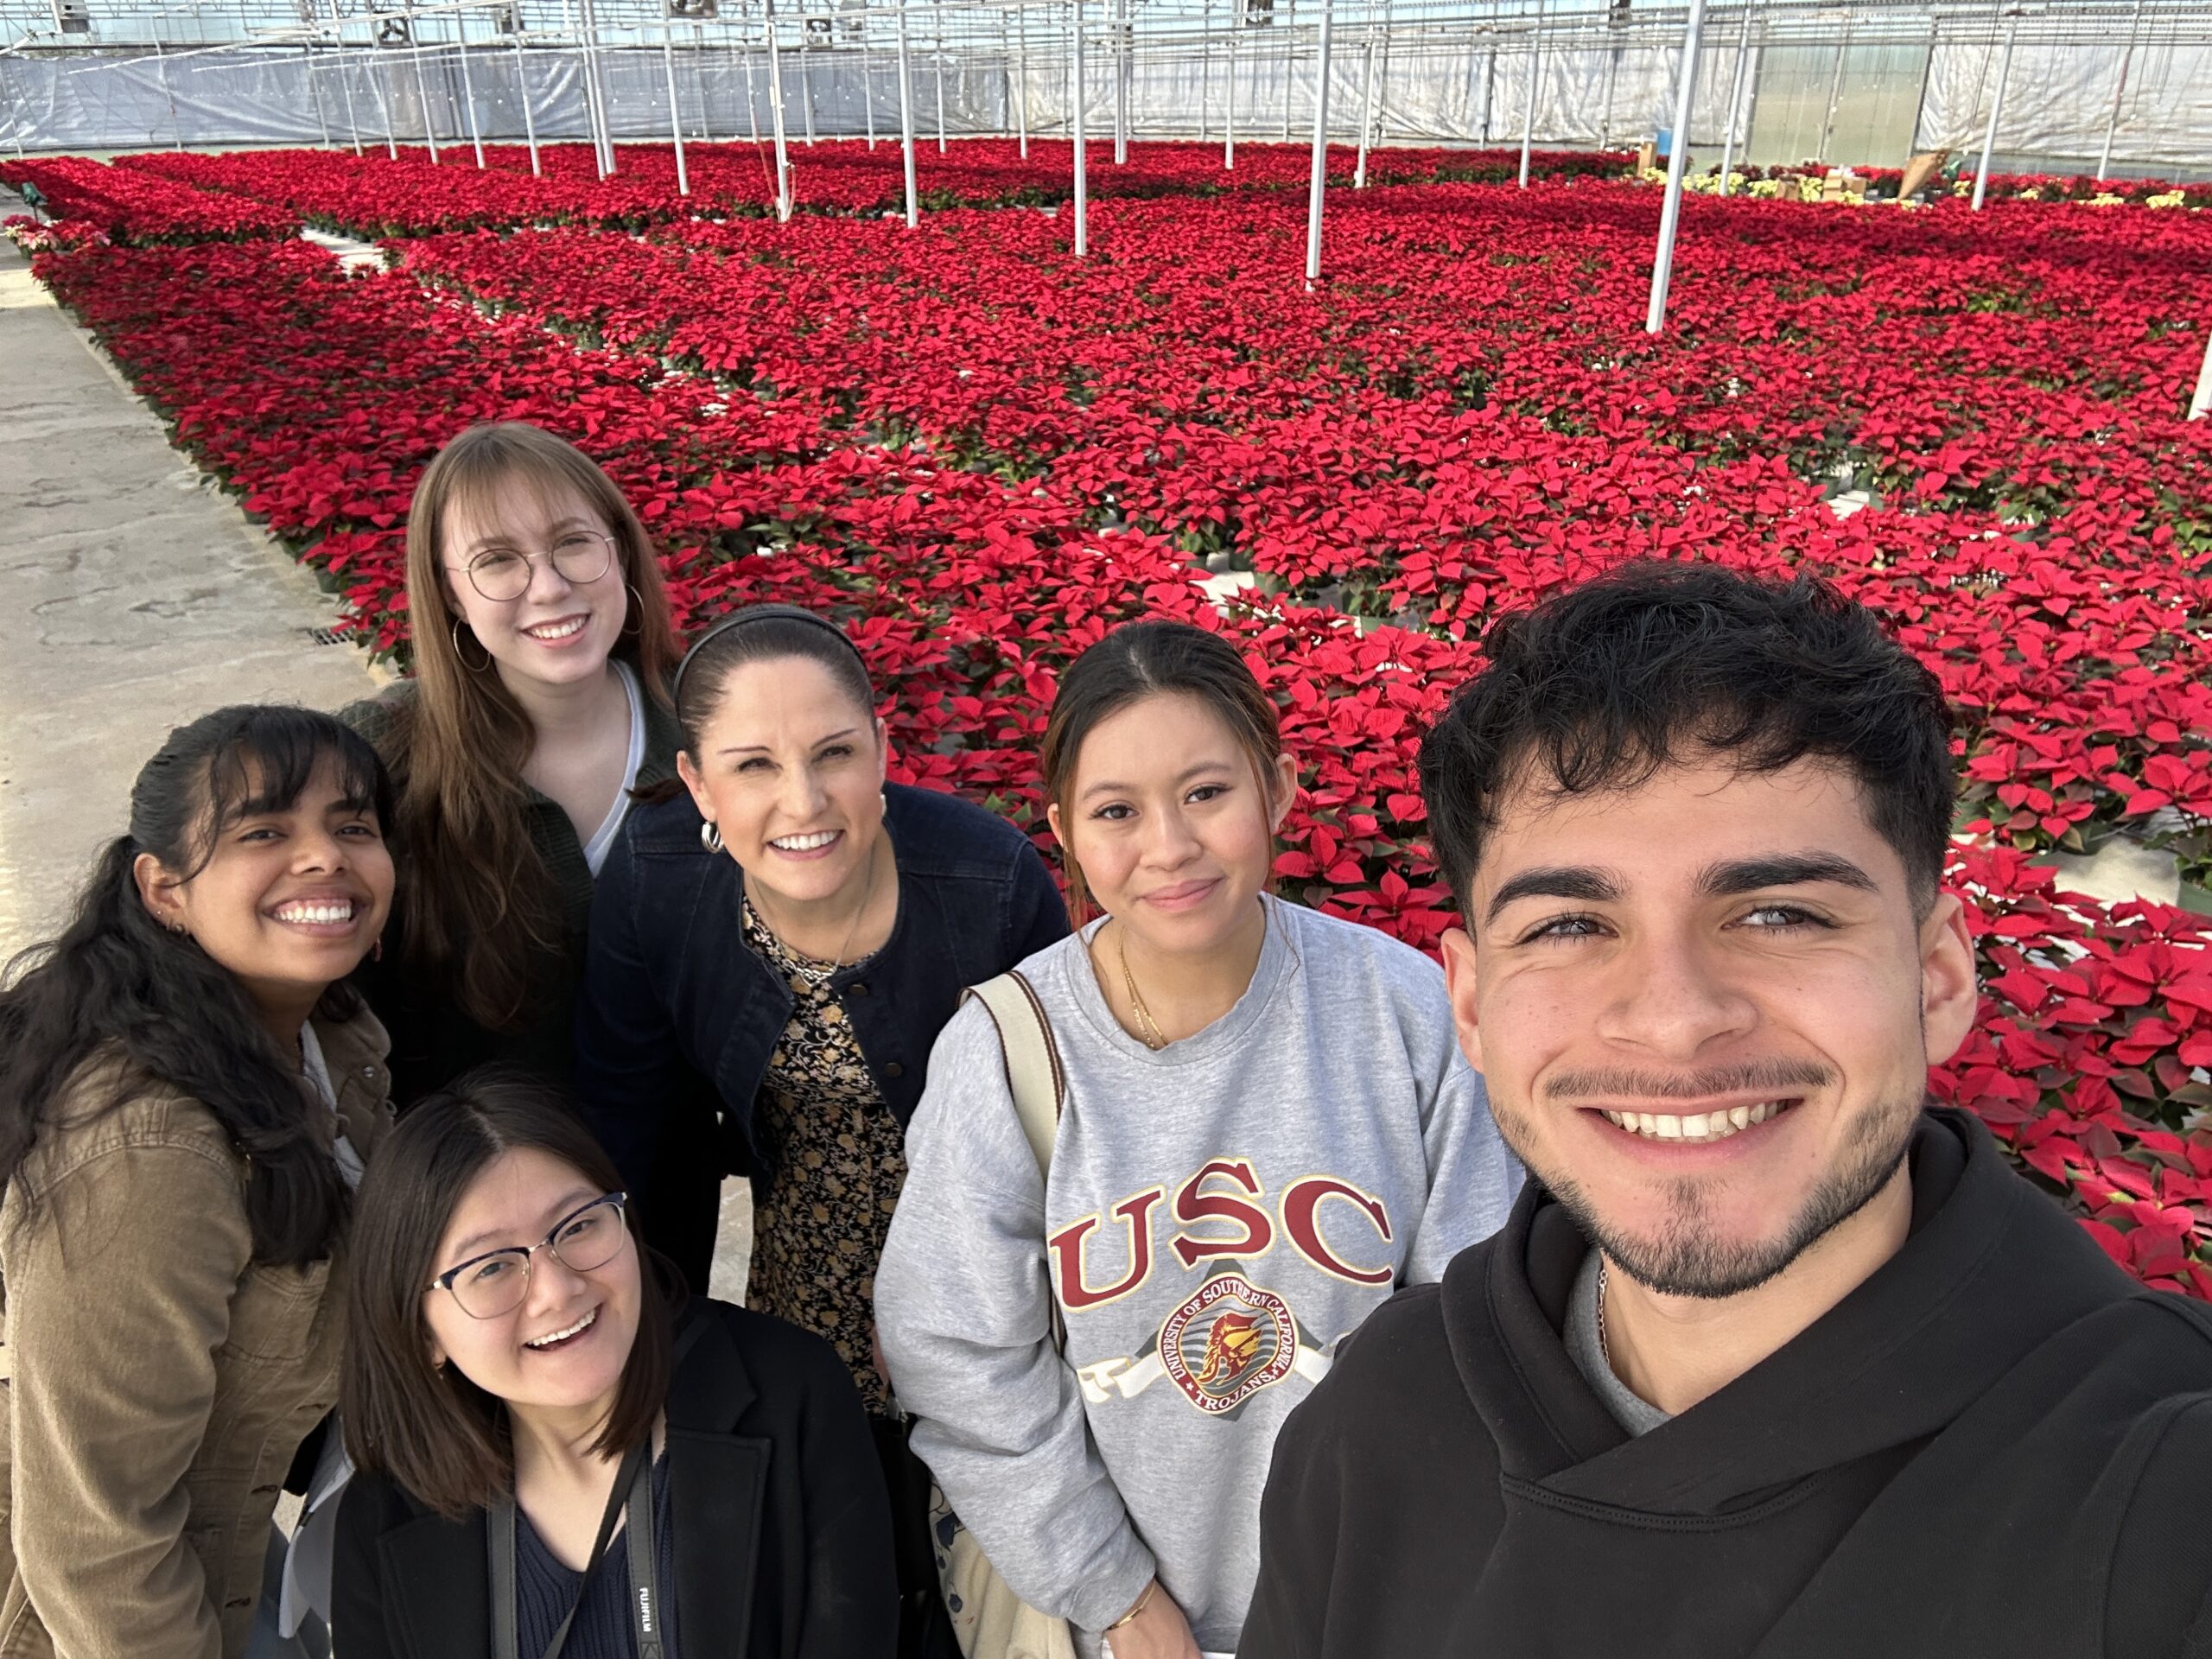 Group photo of Rice University grant project leaders and students in a greenhouse at the Brookwood Community in Brookshire, Texas. The photo includes Dr. Luz Garcini, Kathryn Gonzalez, Ling DeBellis, Sabrina Cuauro Cuauro, Beni Nguyen, and Ricardo Robles. Behind the group is an assortment of poinsettias that were grown by members of the Brookwood Community.